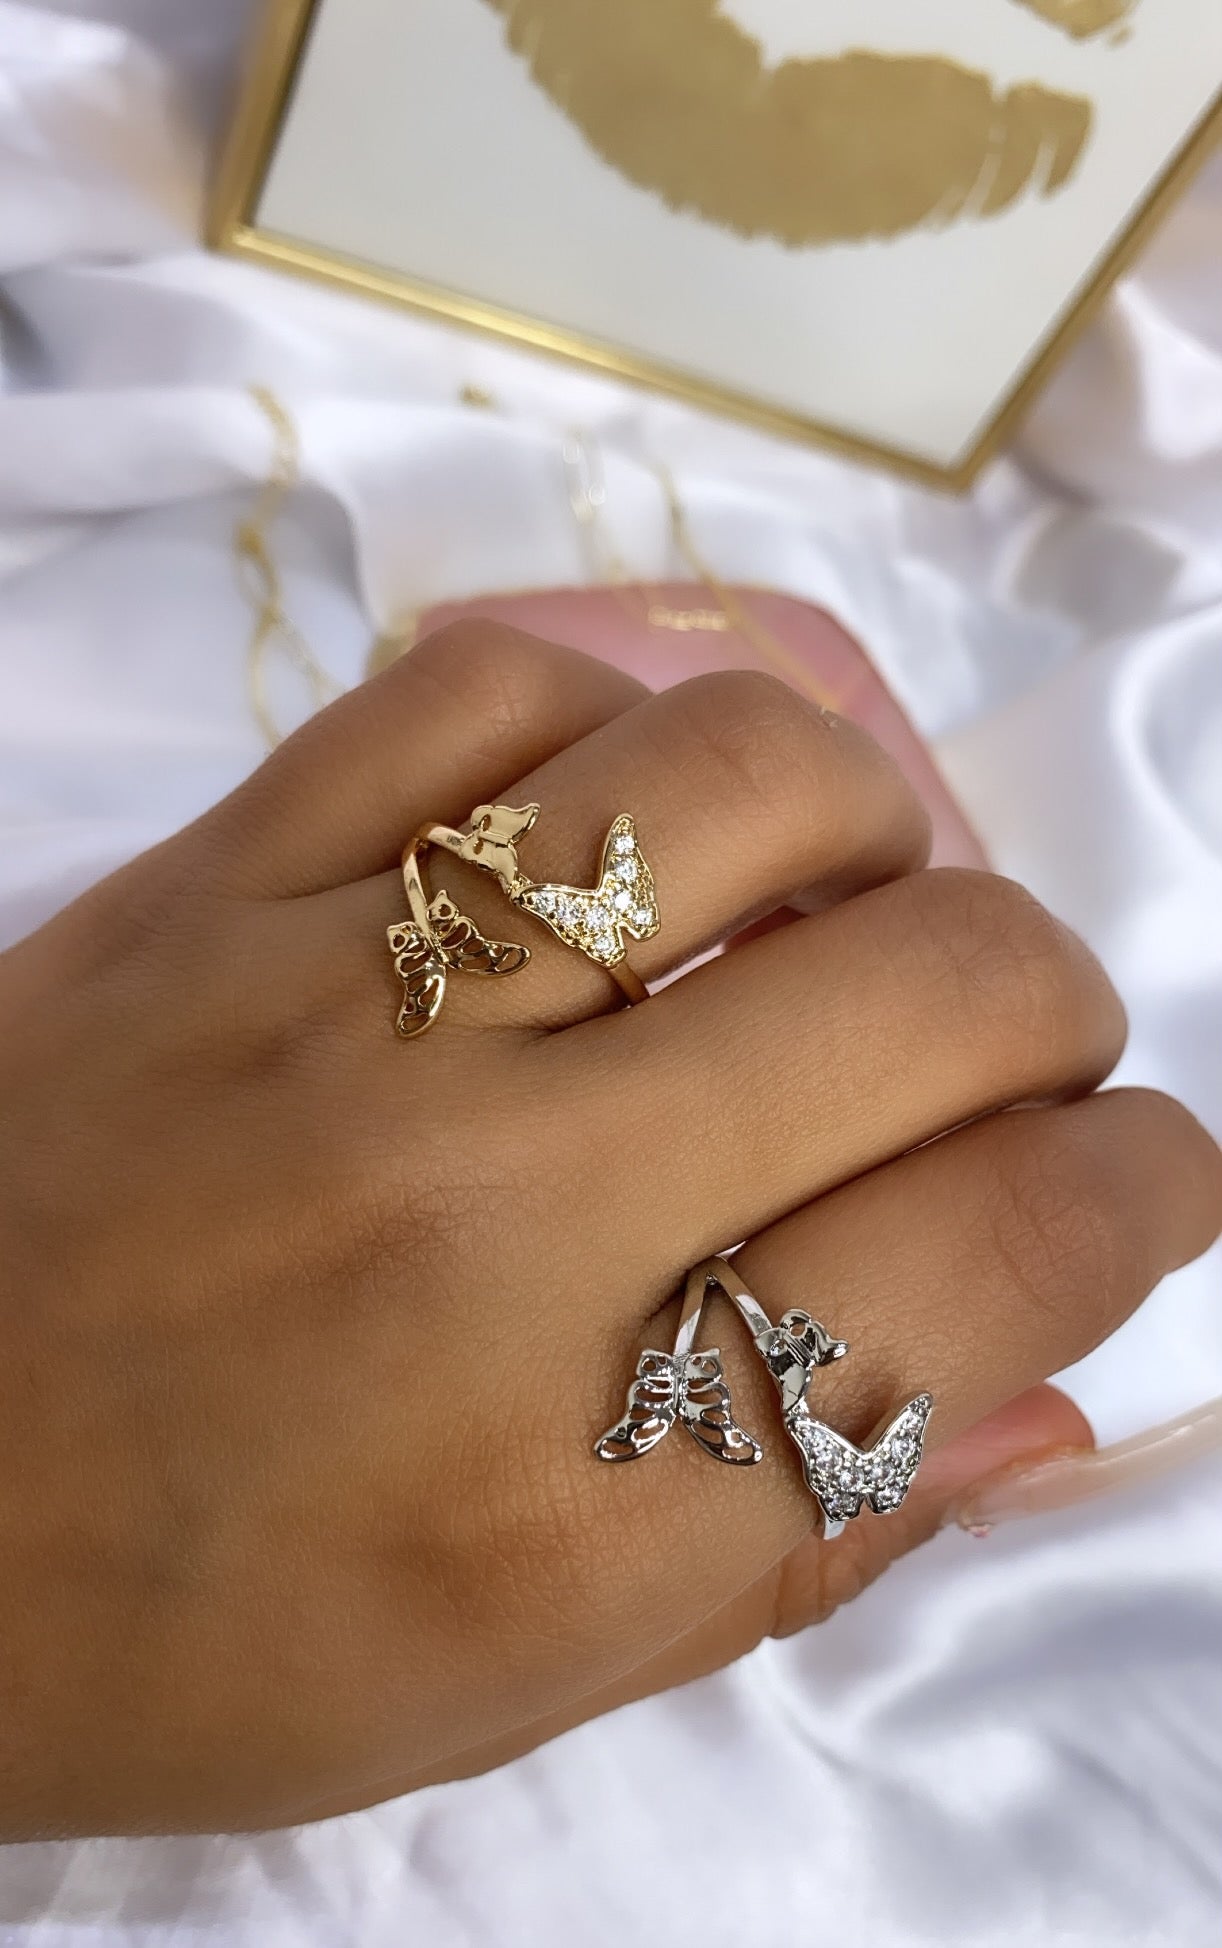 Butterfly ring 2